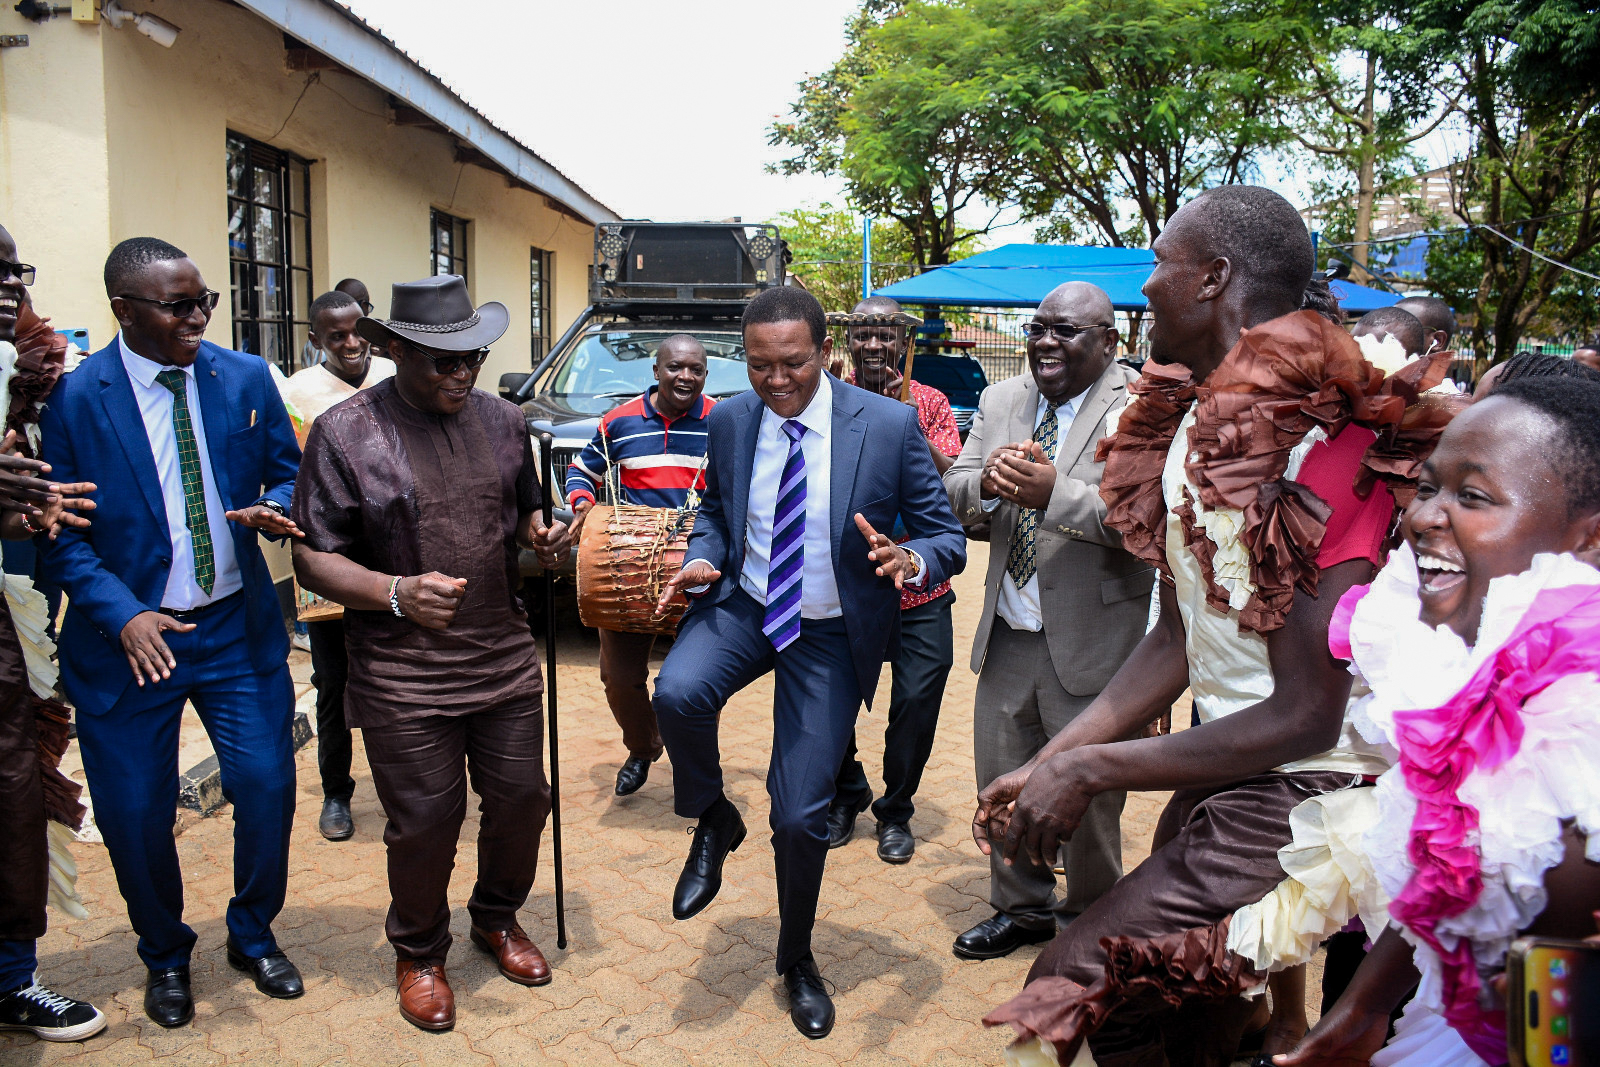 The Cabinet Secretary, Ministry of Tourism and Wildlife, Dr. Alfred Mutua (in navy blue suit & striped tie), the Governor of Bungoma County, H.E. Rt. Hon. Kenneth Lusaka (wearing a hat), and other officials, participating in the "Kamabeka" dance.